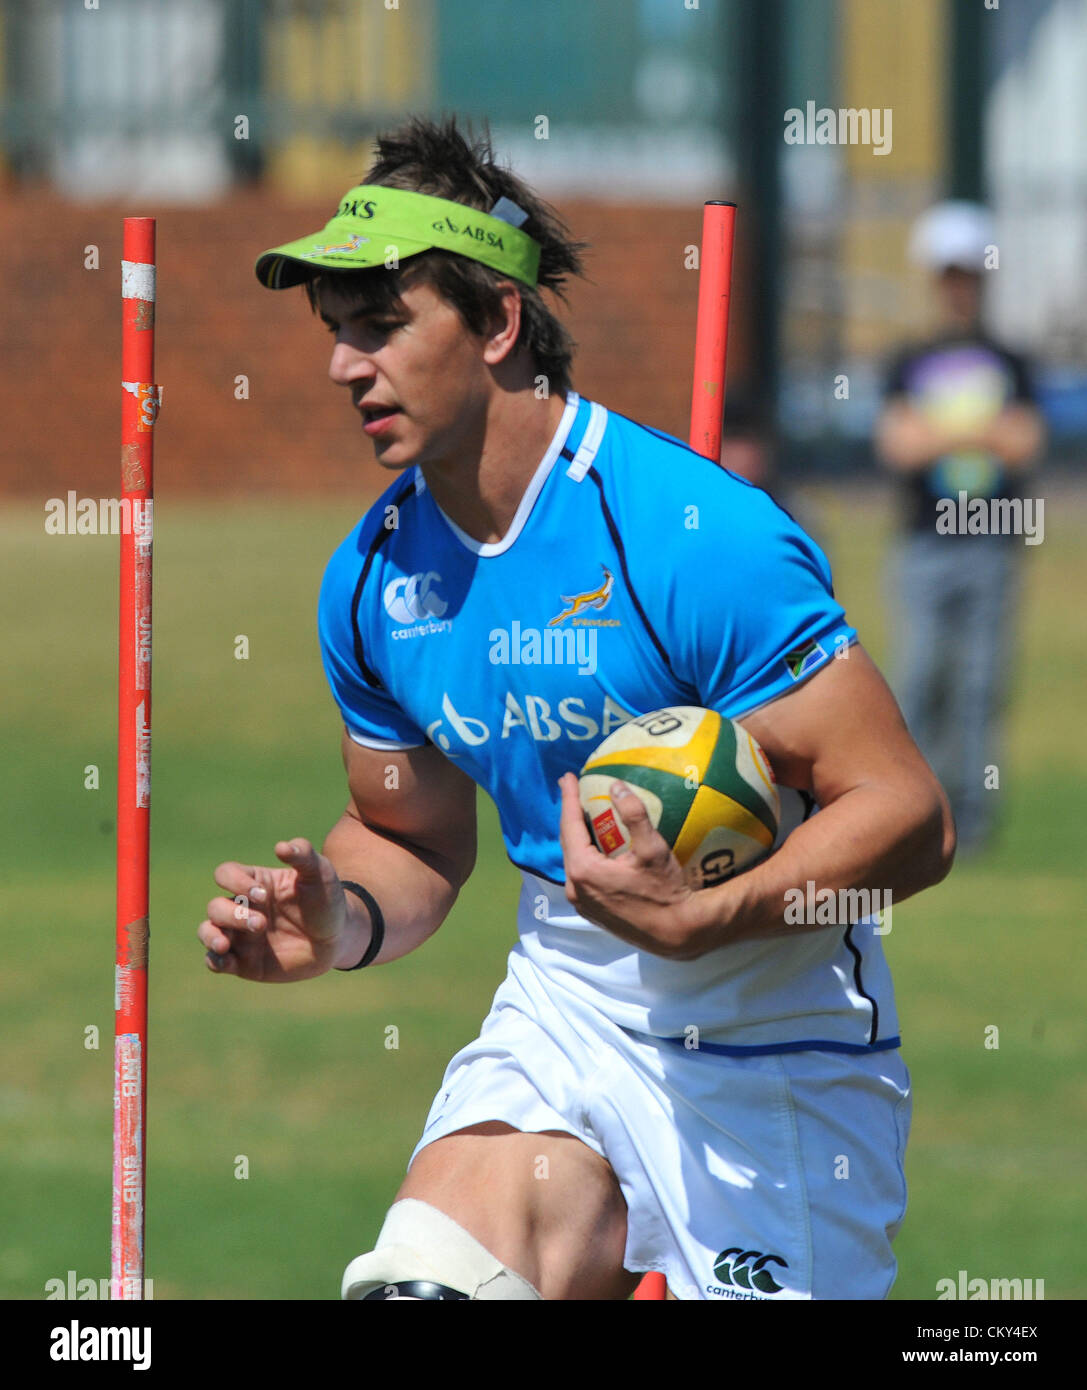 JOHANNESBURG, SOUTH AFRICA - SEPTEMBER 01, Eben Etzebeth with ball in hand during the South African national rugby team field session and media conference at KES on September 01, 2012 in Johannesburg, South Africa Photo by Duif du Toit / Gallo Images Stock Photo